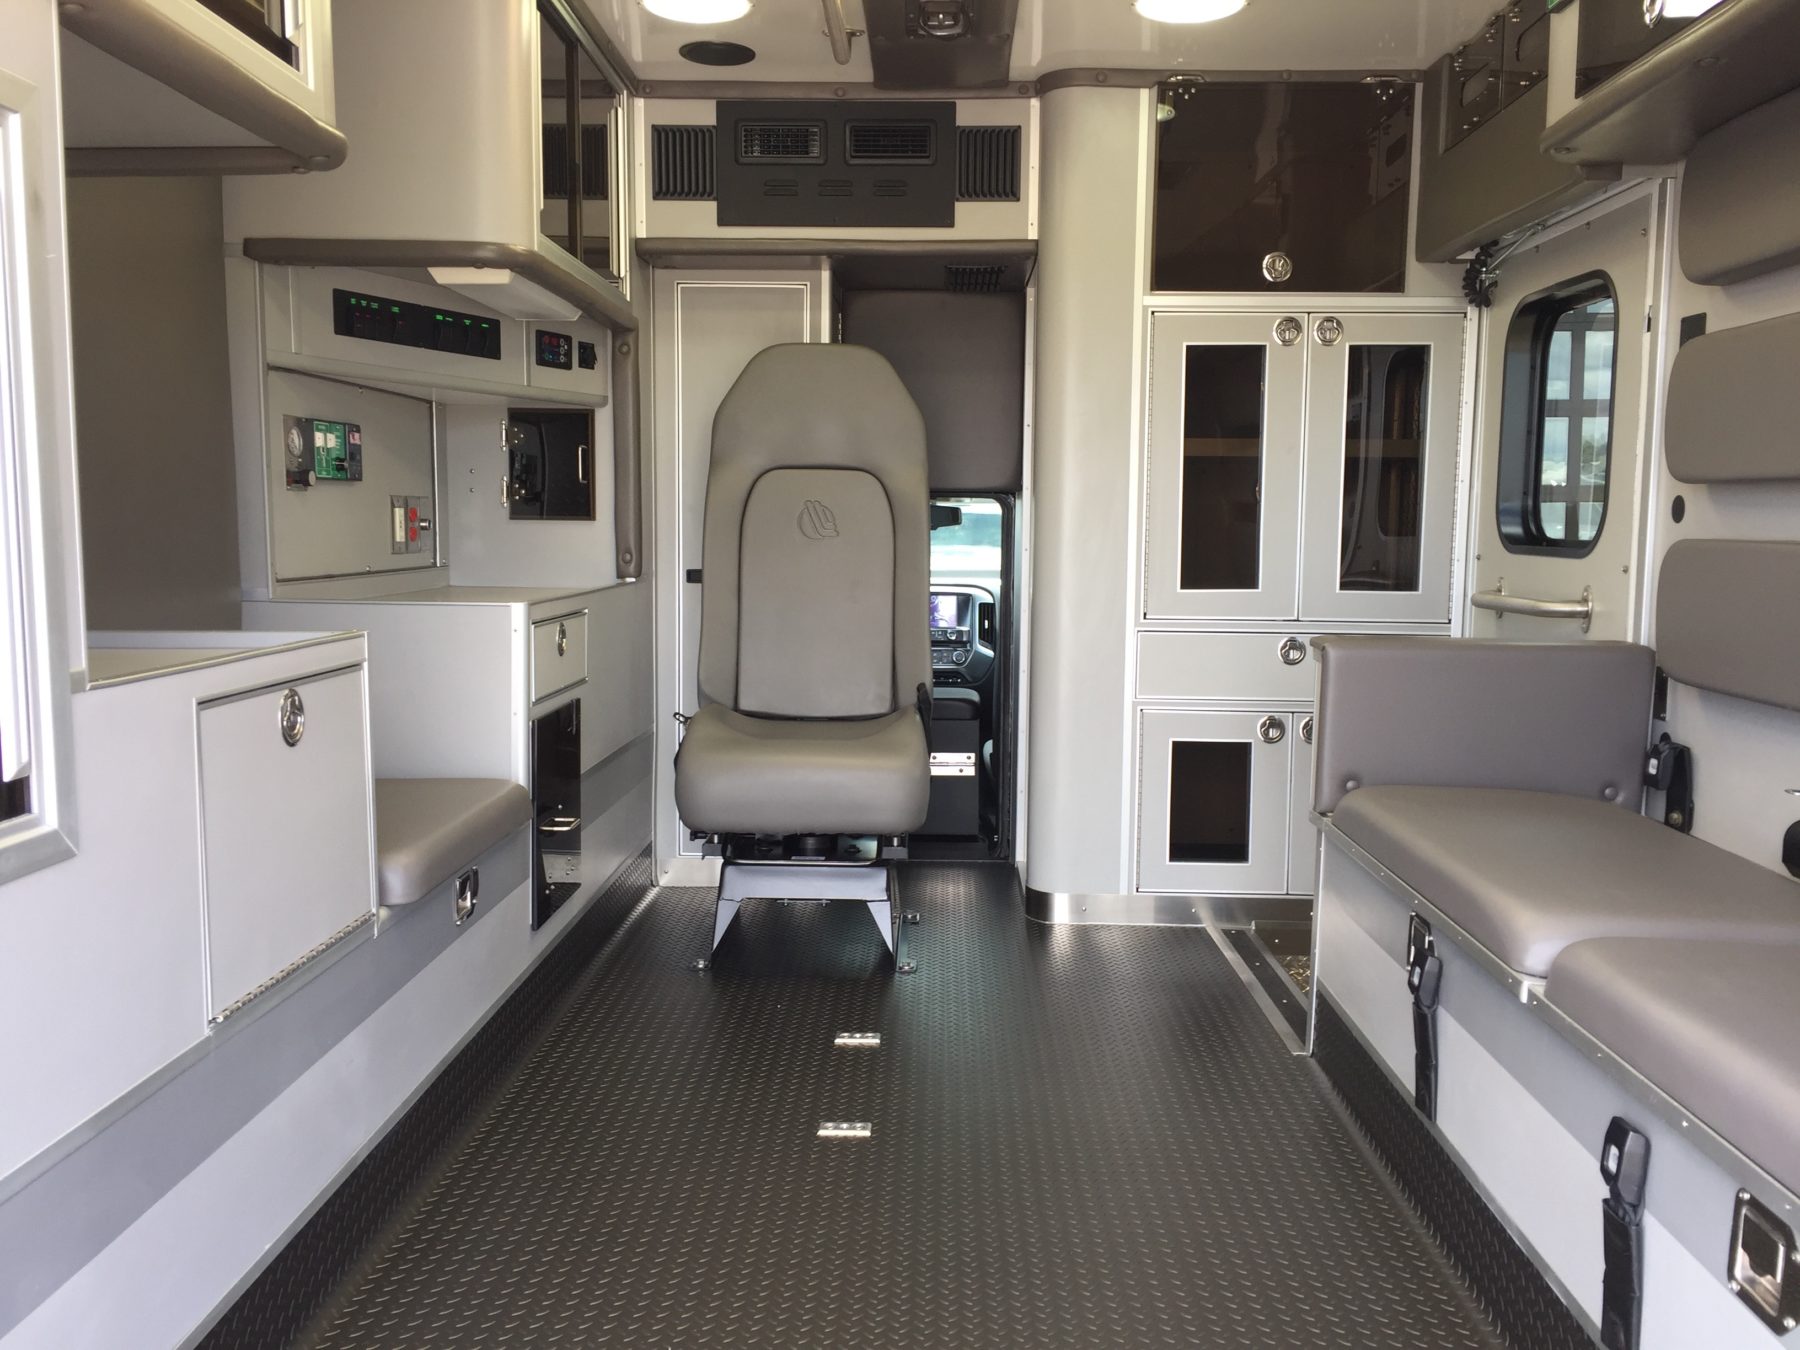 2018 Chevrolet K3500 4x4 Type 1 Ambulance For Sale – Picture 2